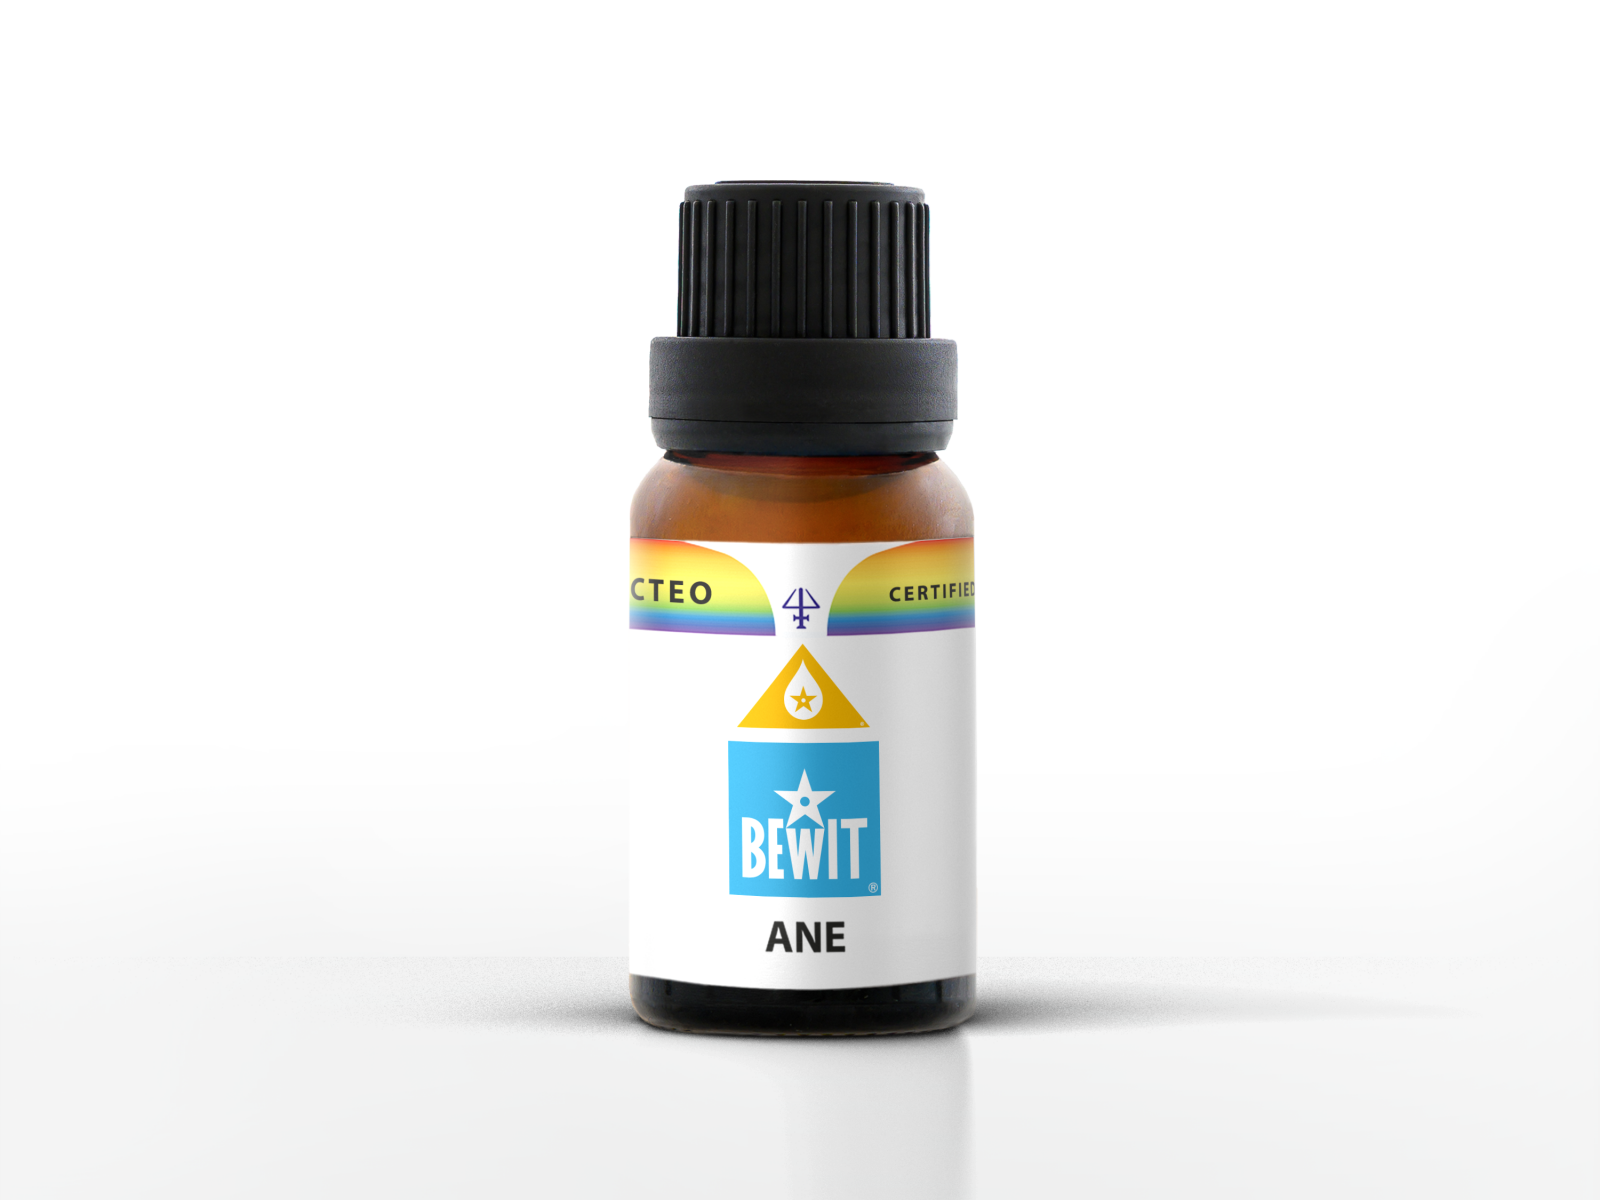 BEWIT ANE - Blend of essential oils - 1